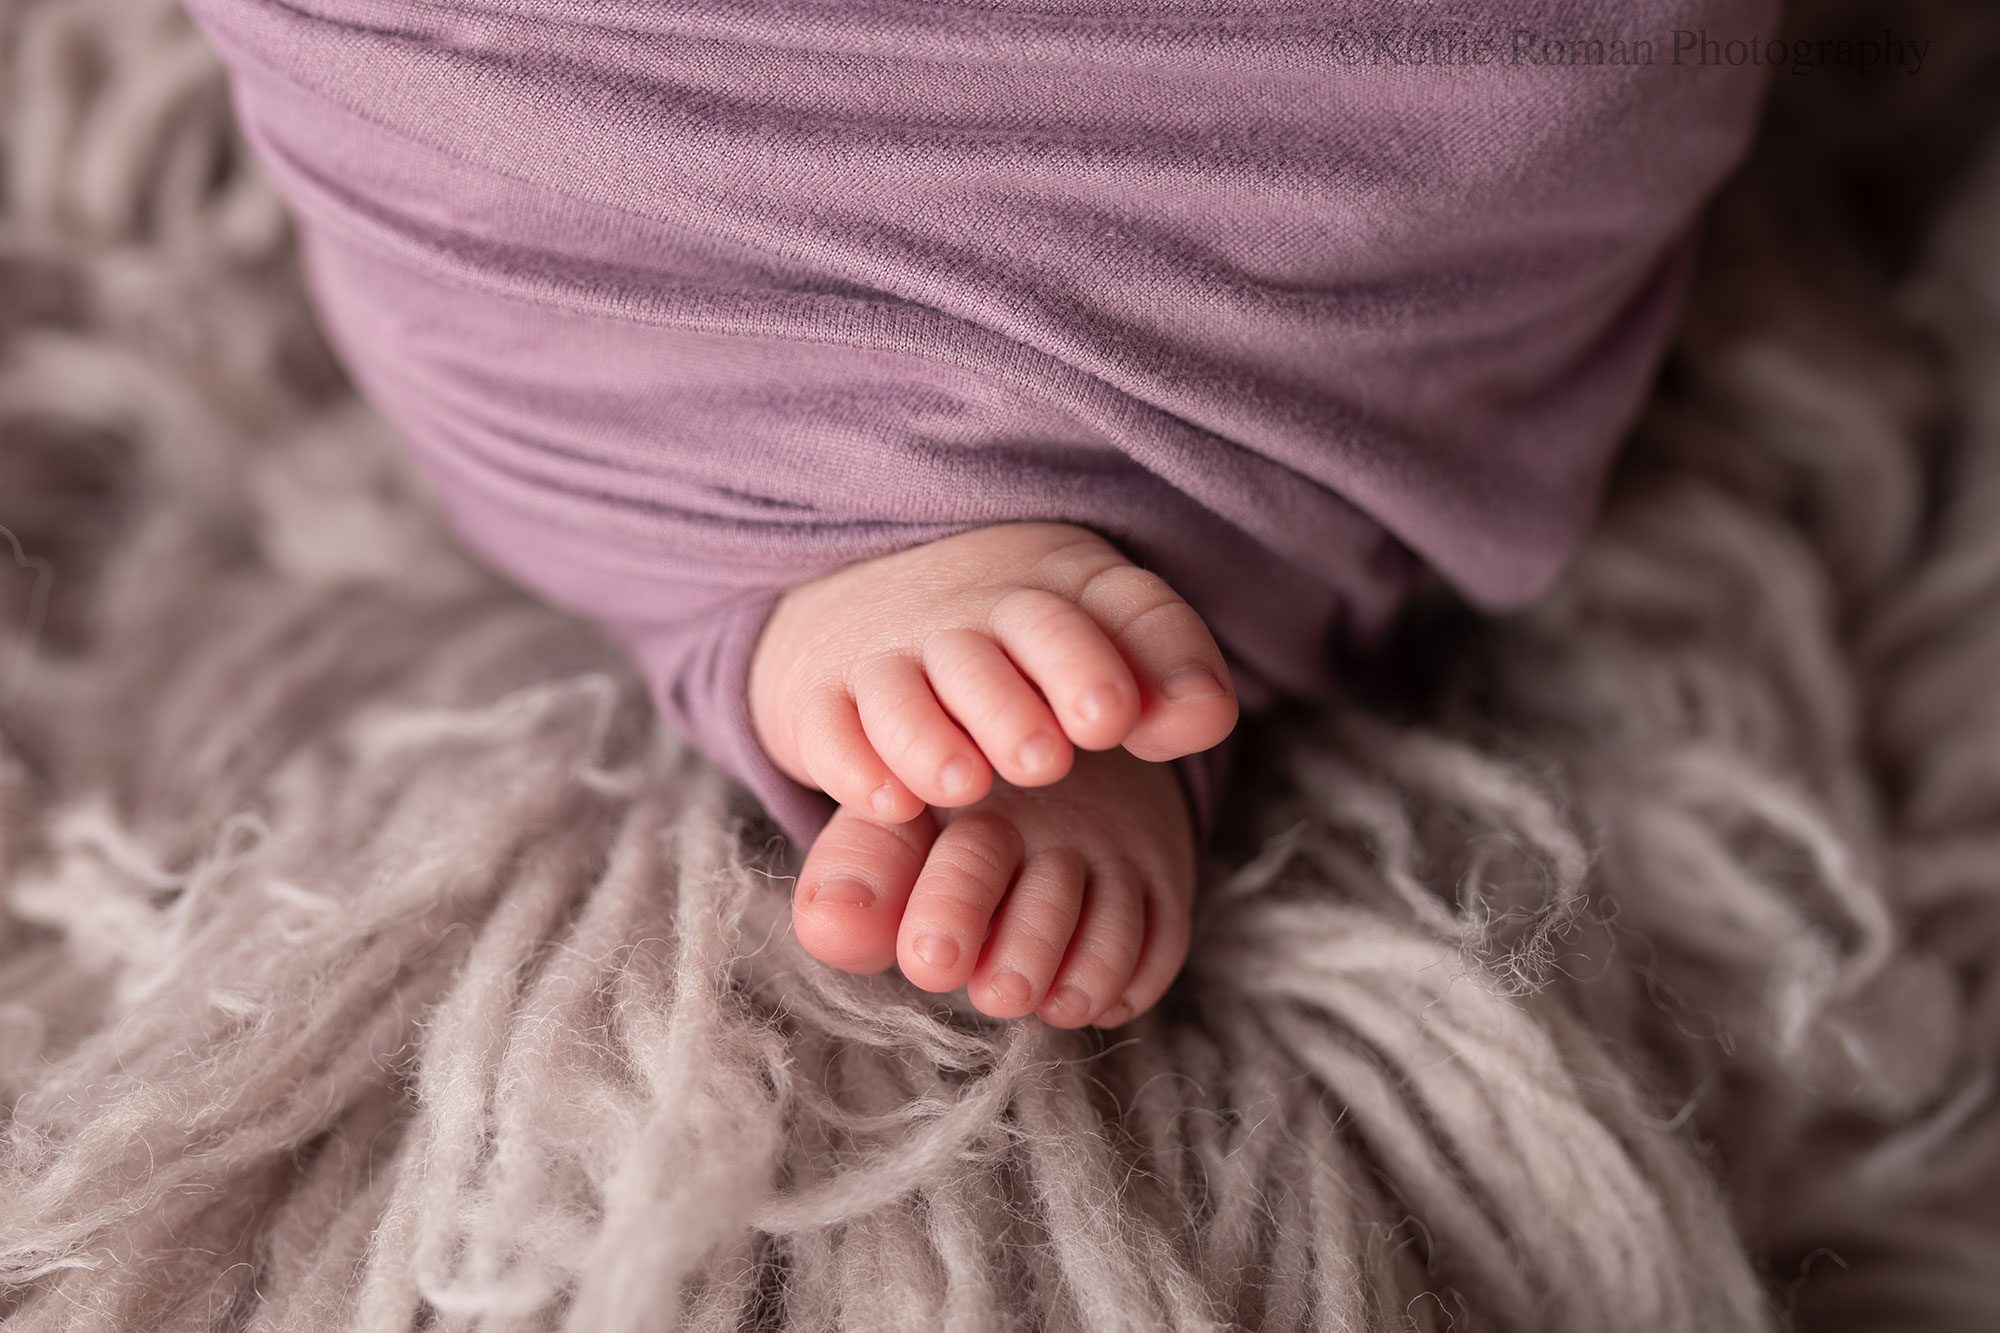 newborn photography milwaukee. a close up image of newborns feet and toes. they are mostly swaddled in a deep purple fabric on top of a purple rug.
